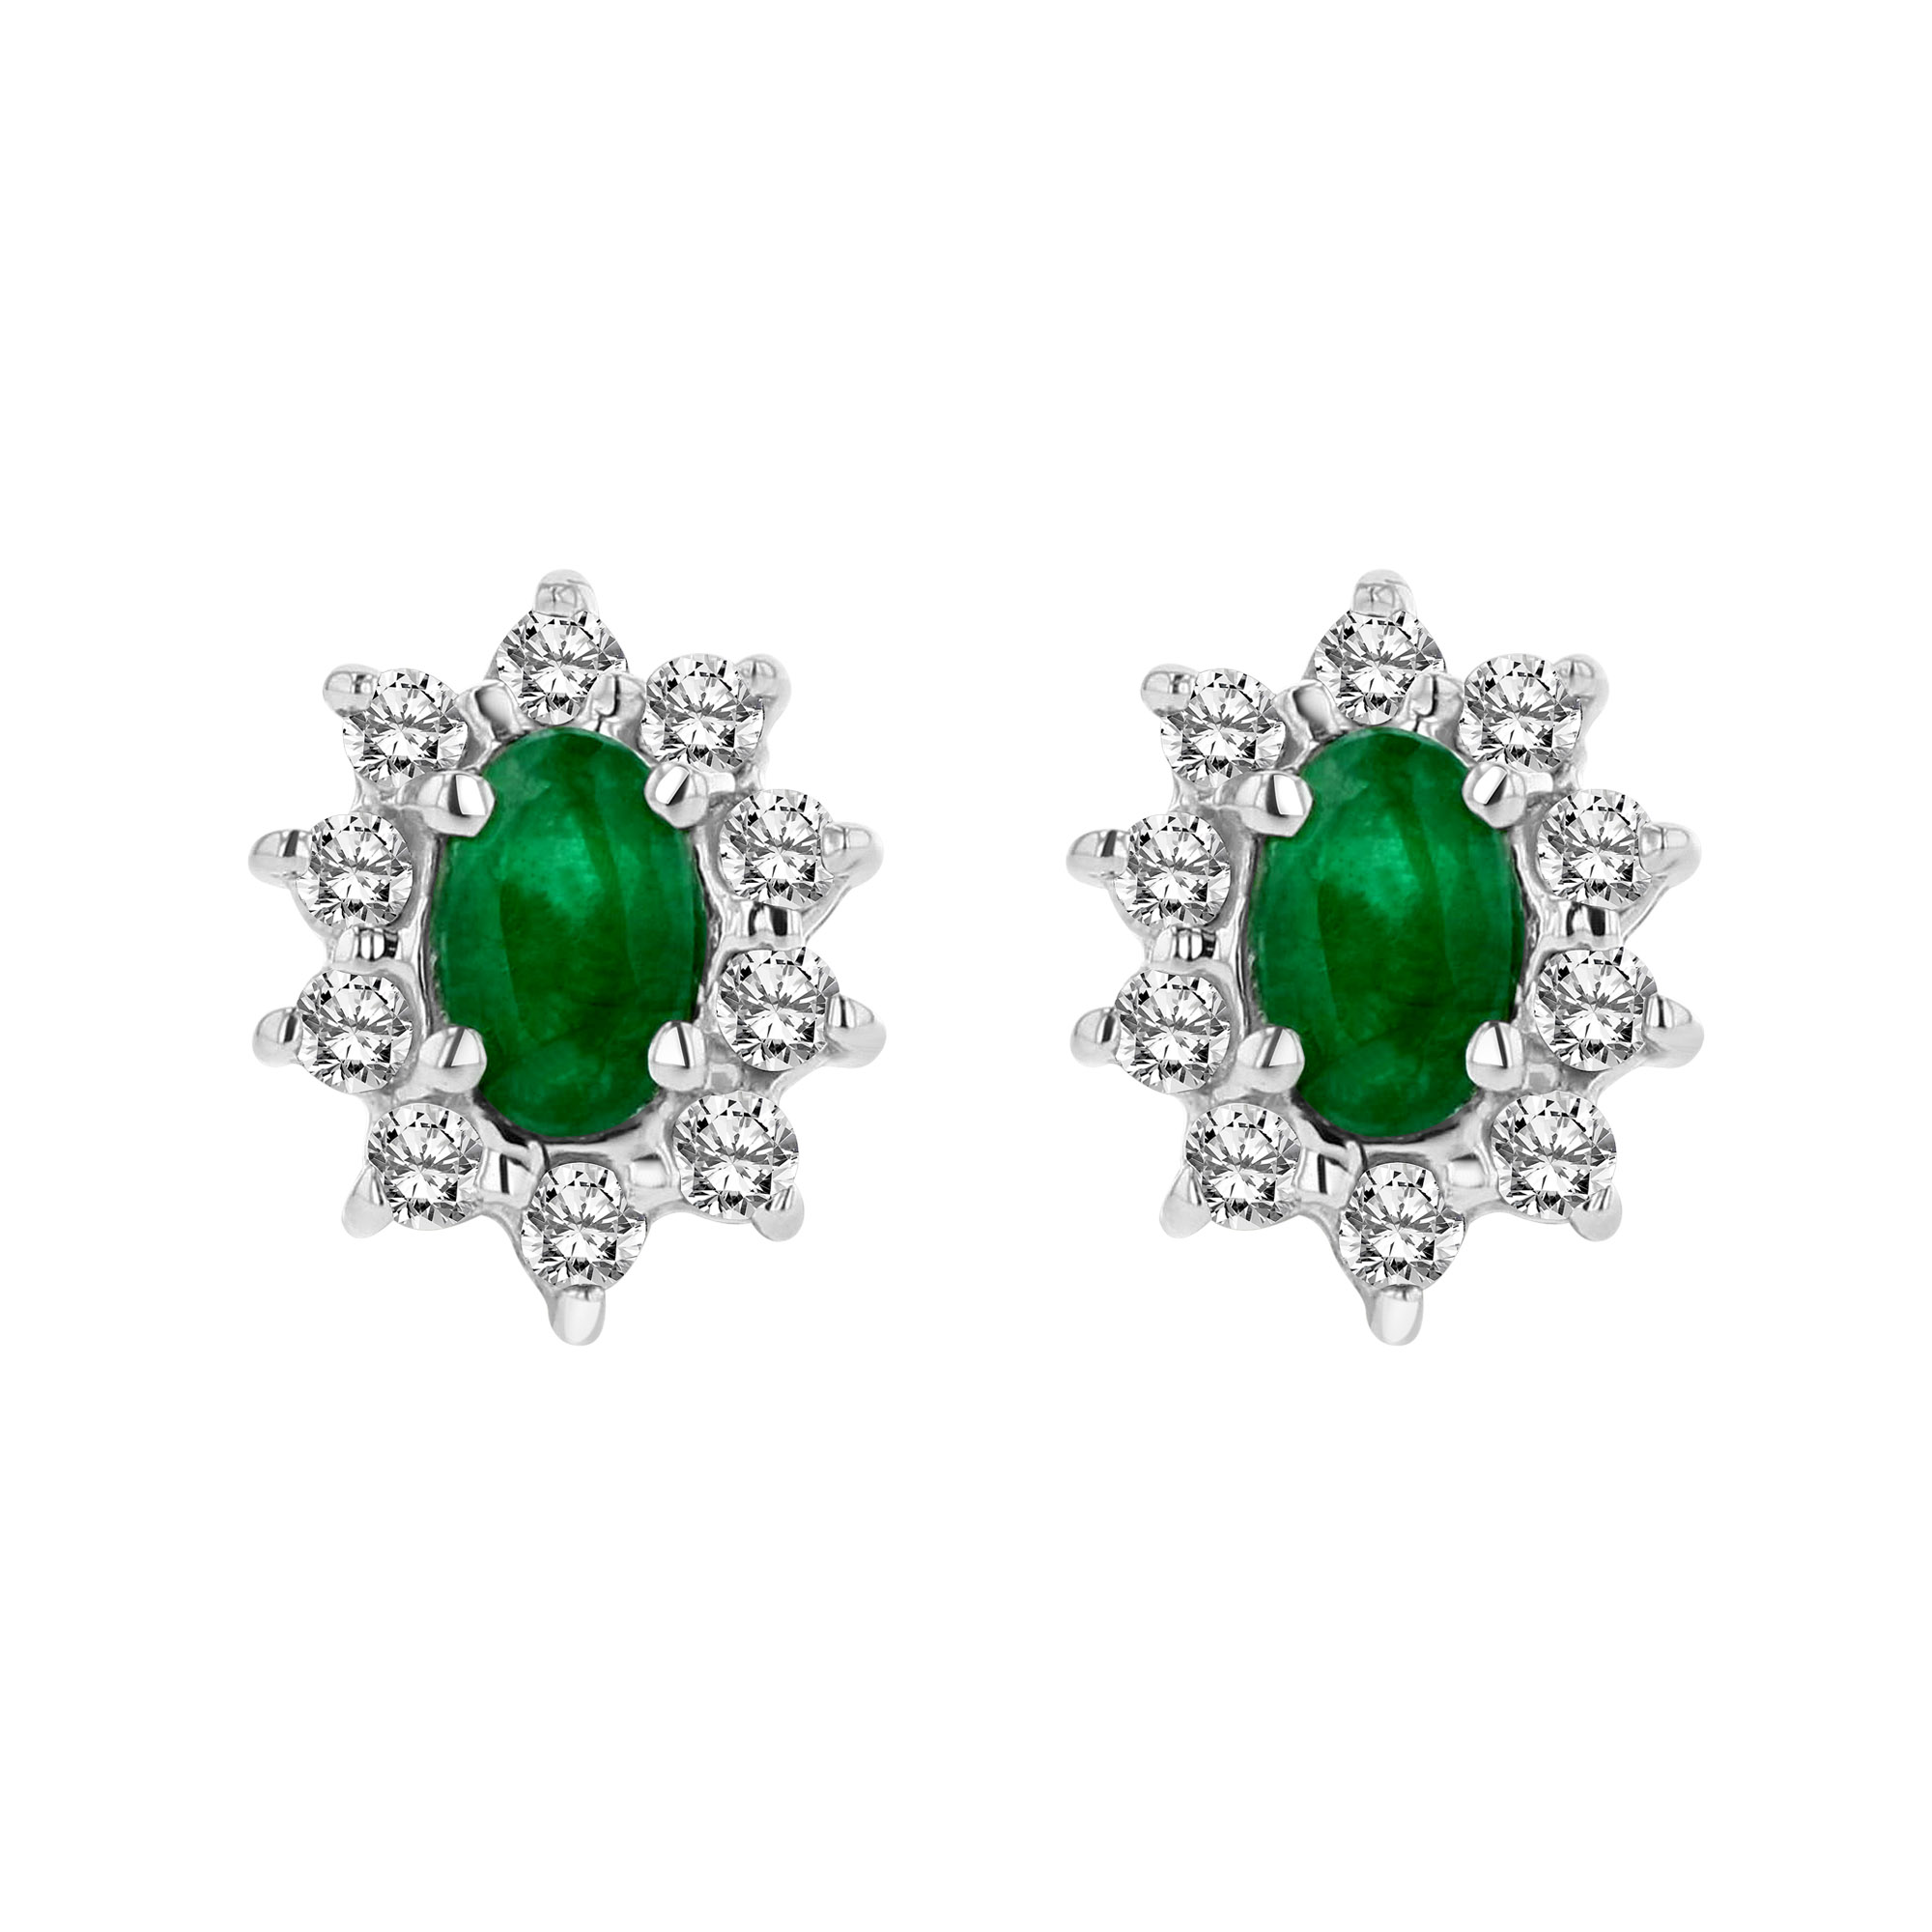 View 0.70cttw Diamond and Emerald Earring in 14k Gold